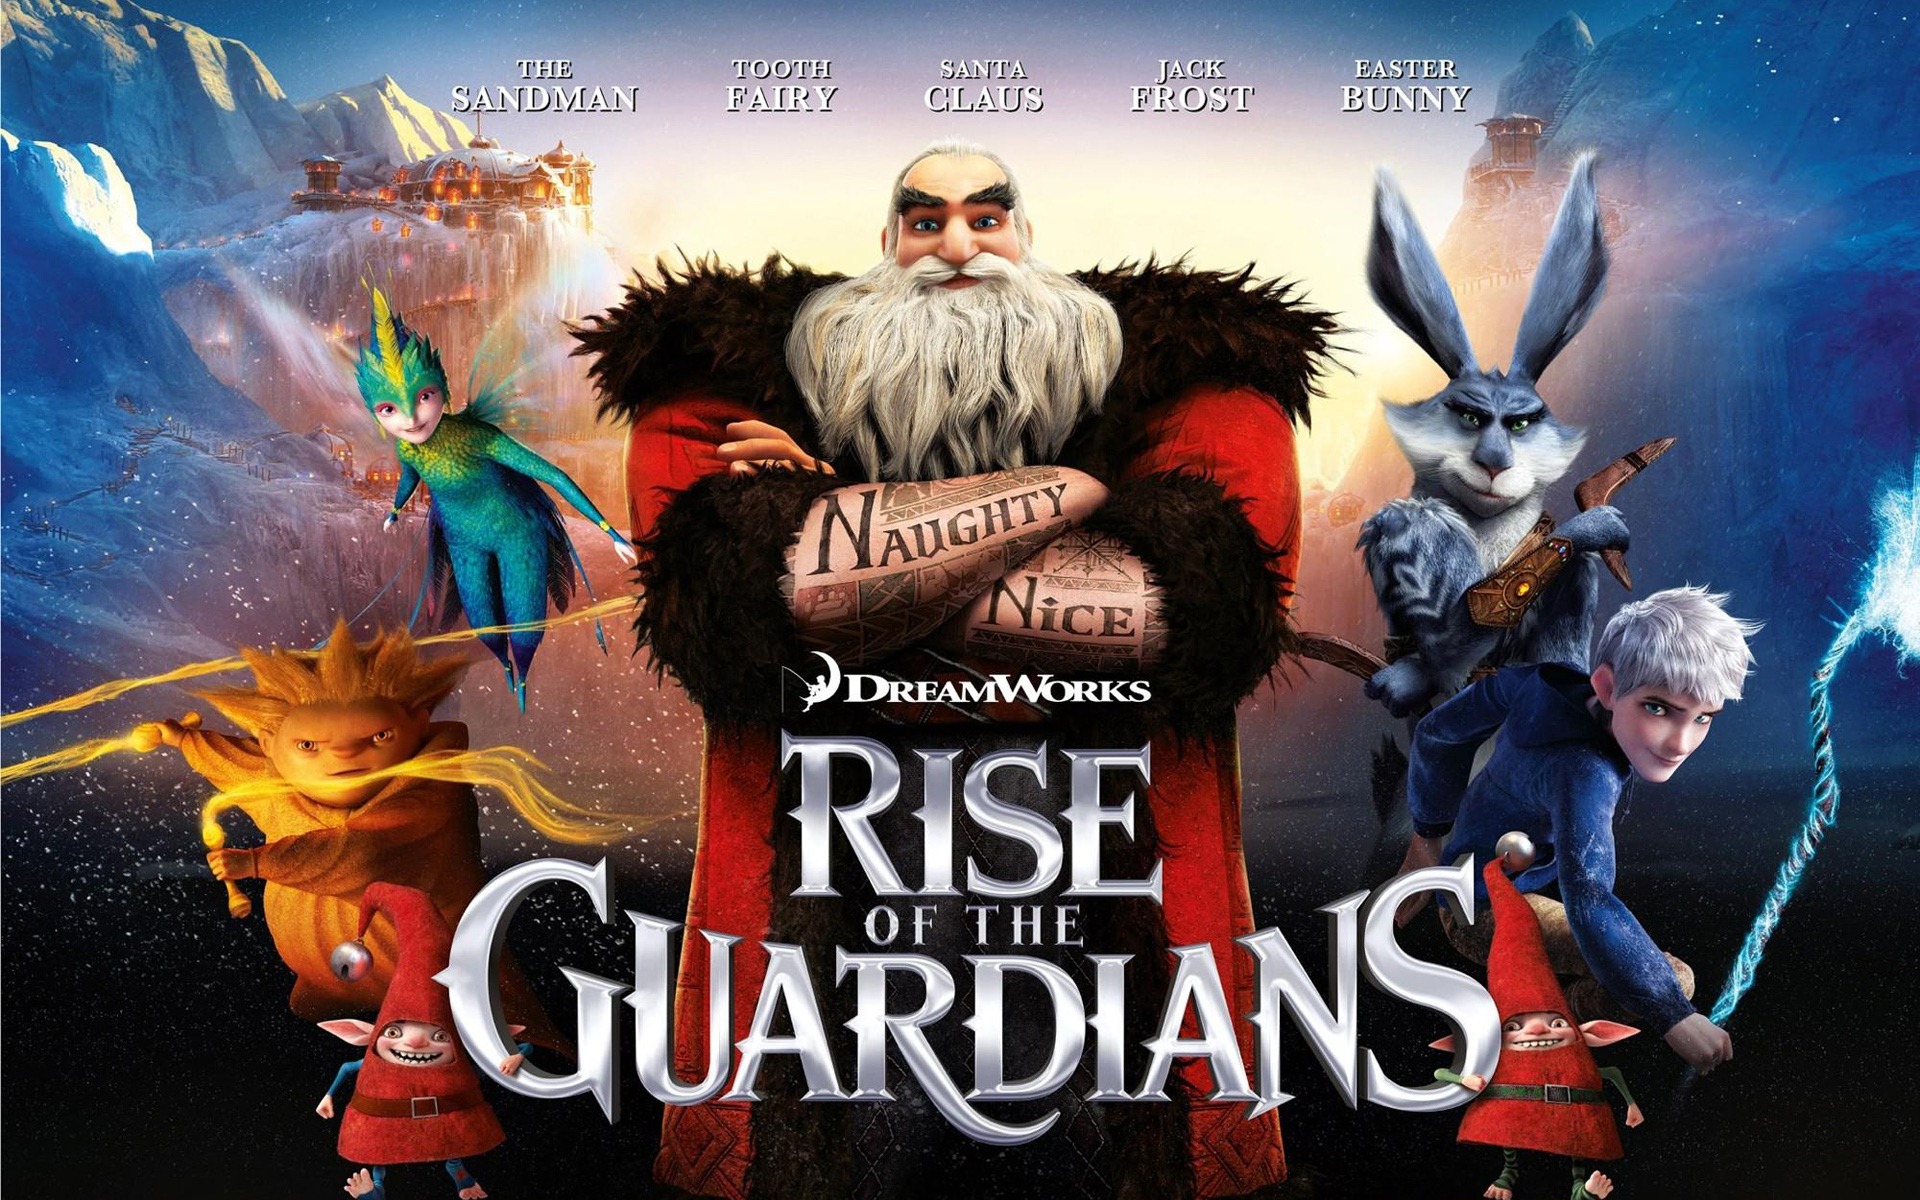 Rise of the Guardians HD wallpapers #11 - 1920x1200